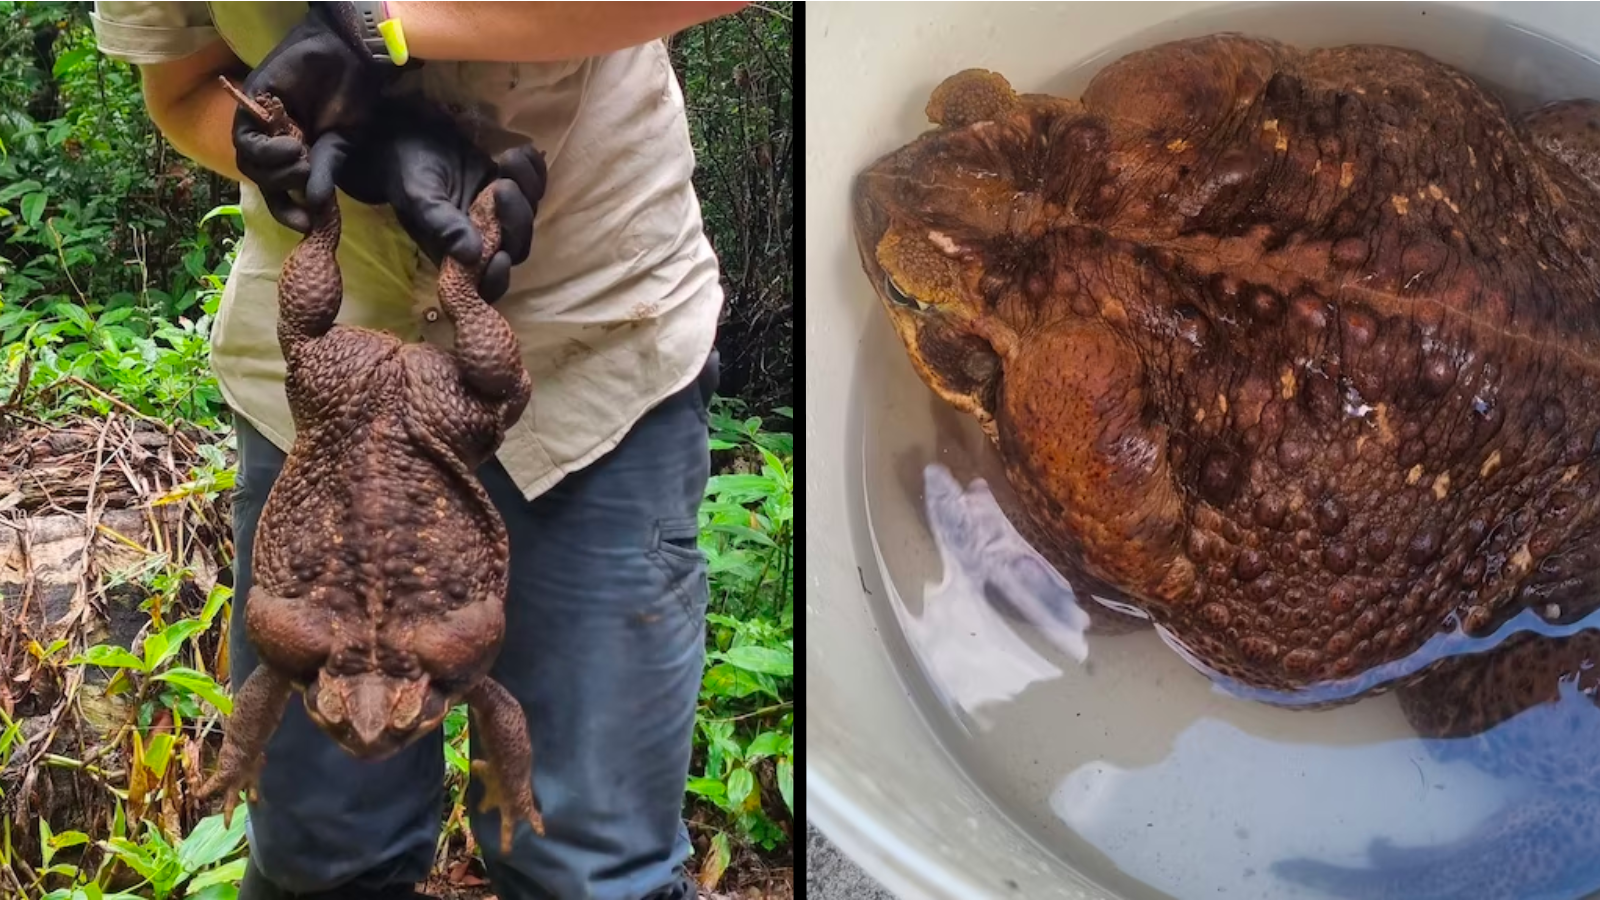 Giant cane toad discovered in Australia dubbed 'Toadzilla